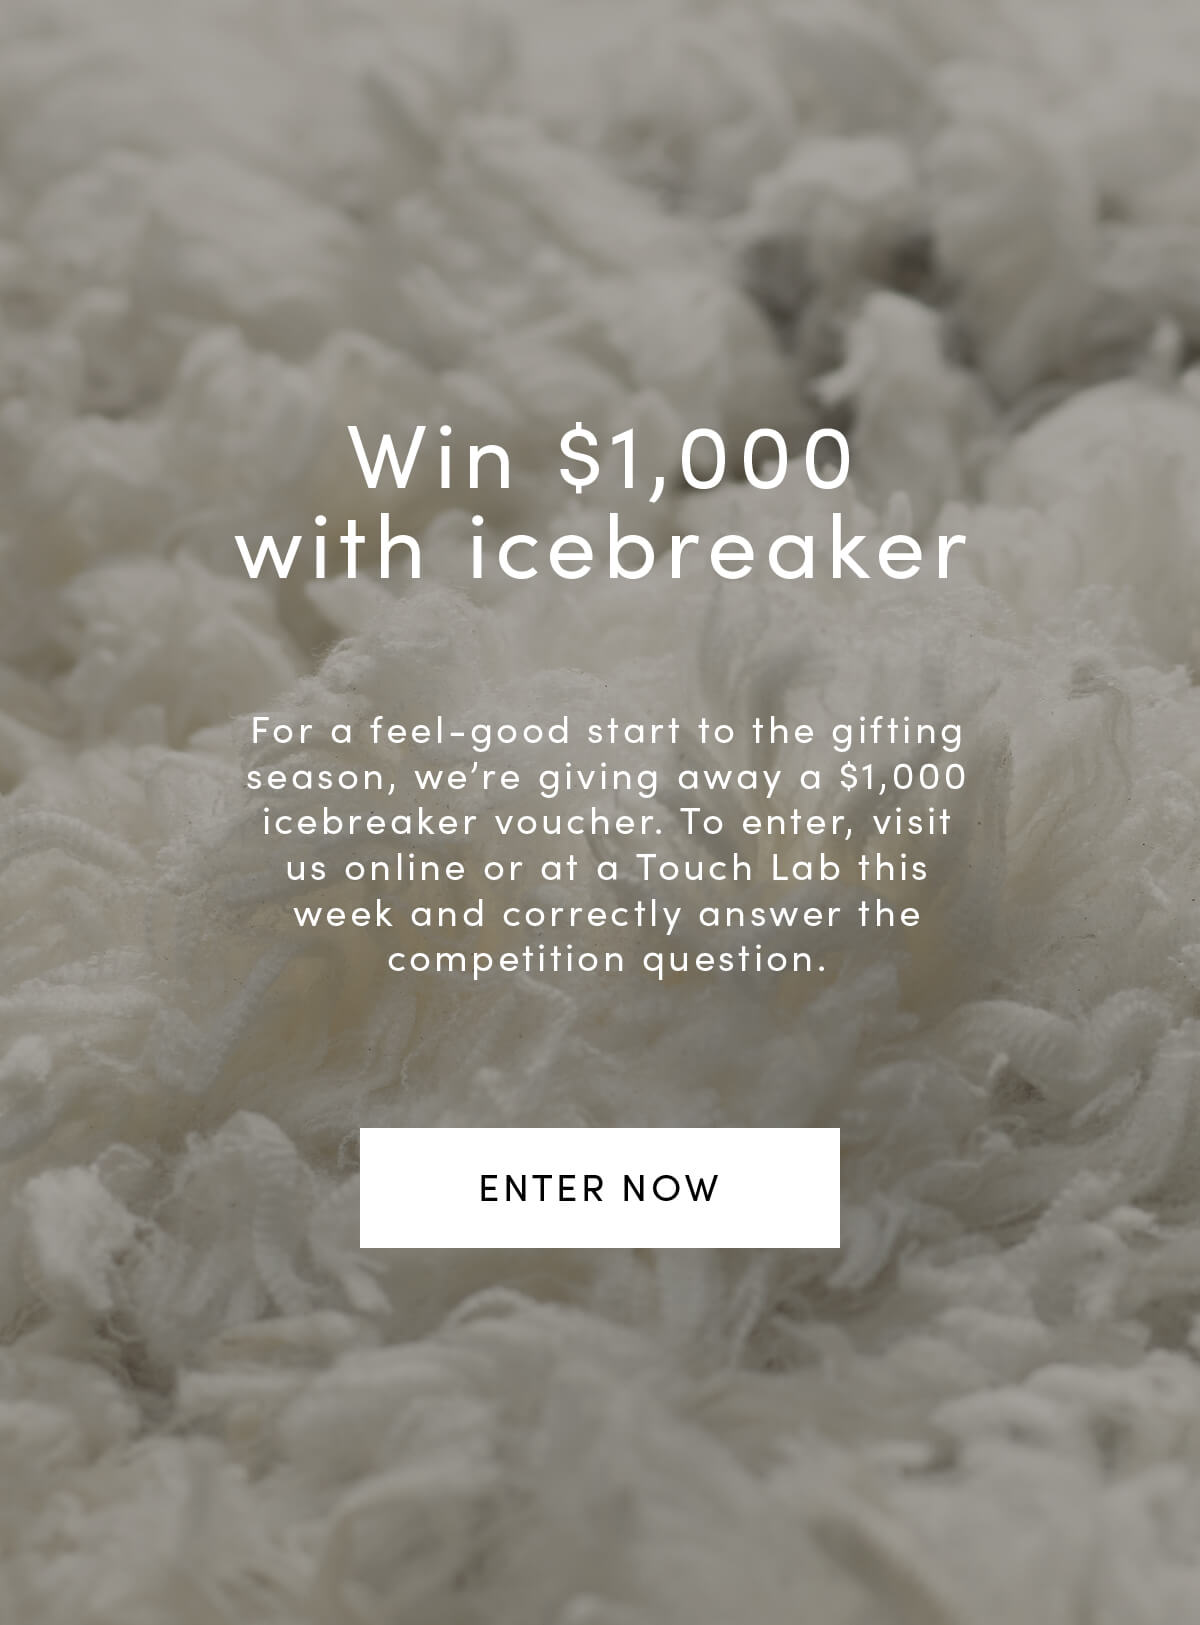 Be in to win a $1000 voucher